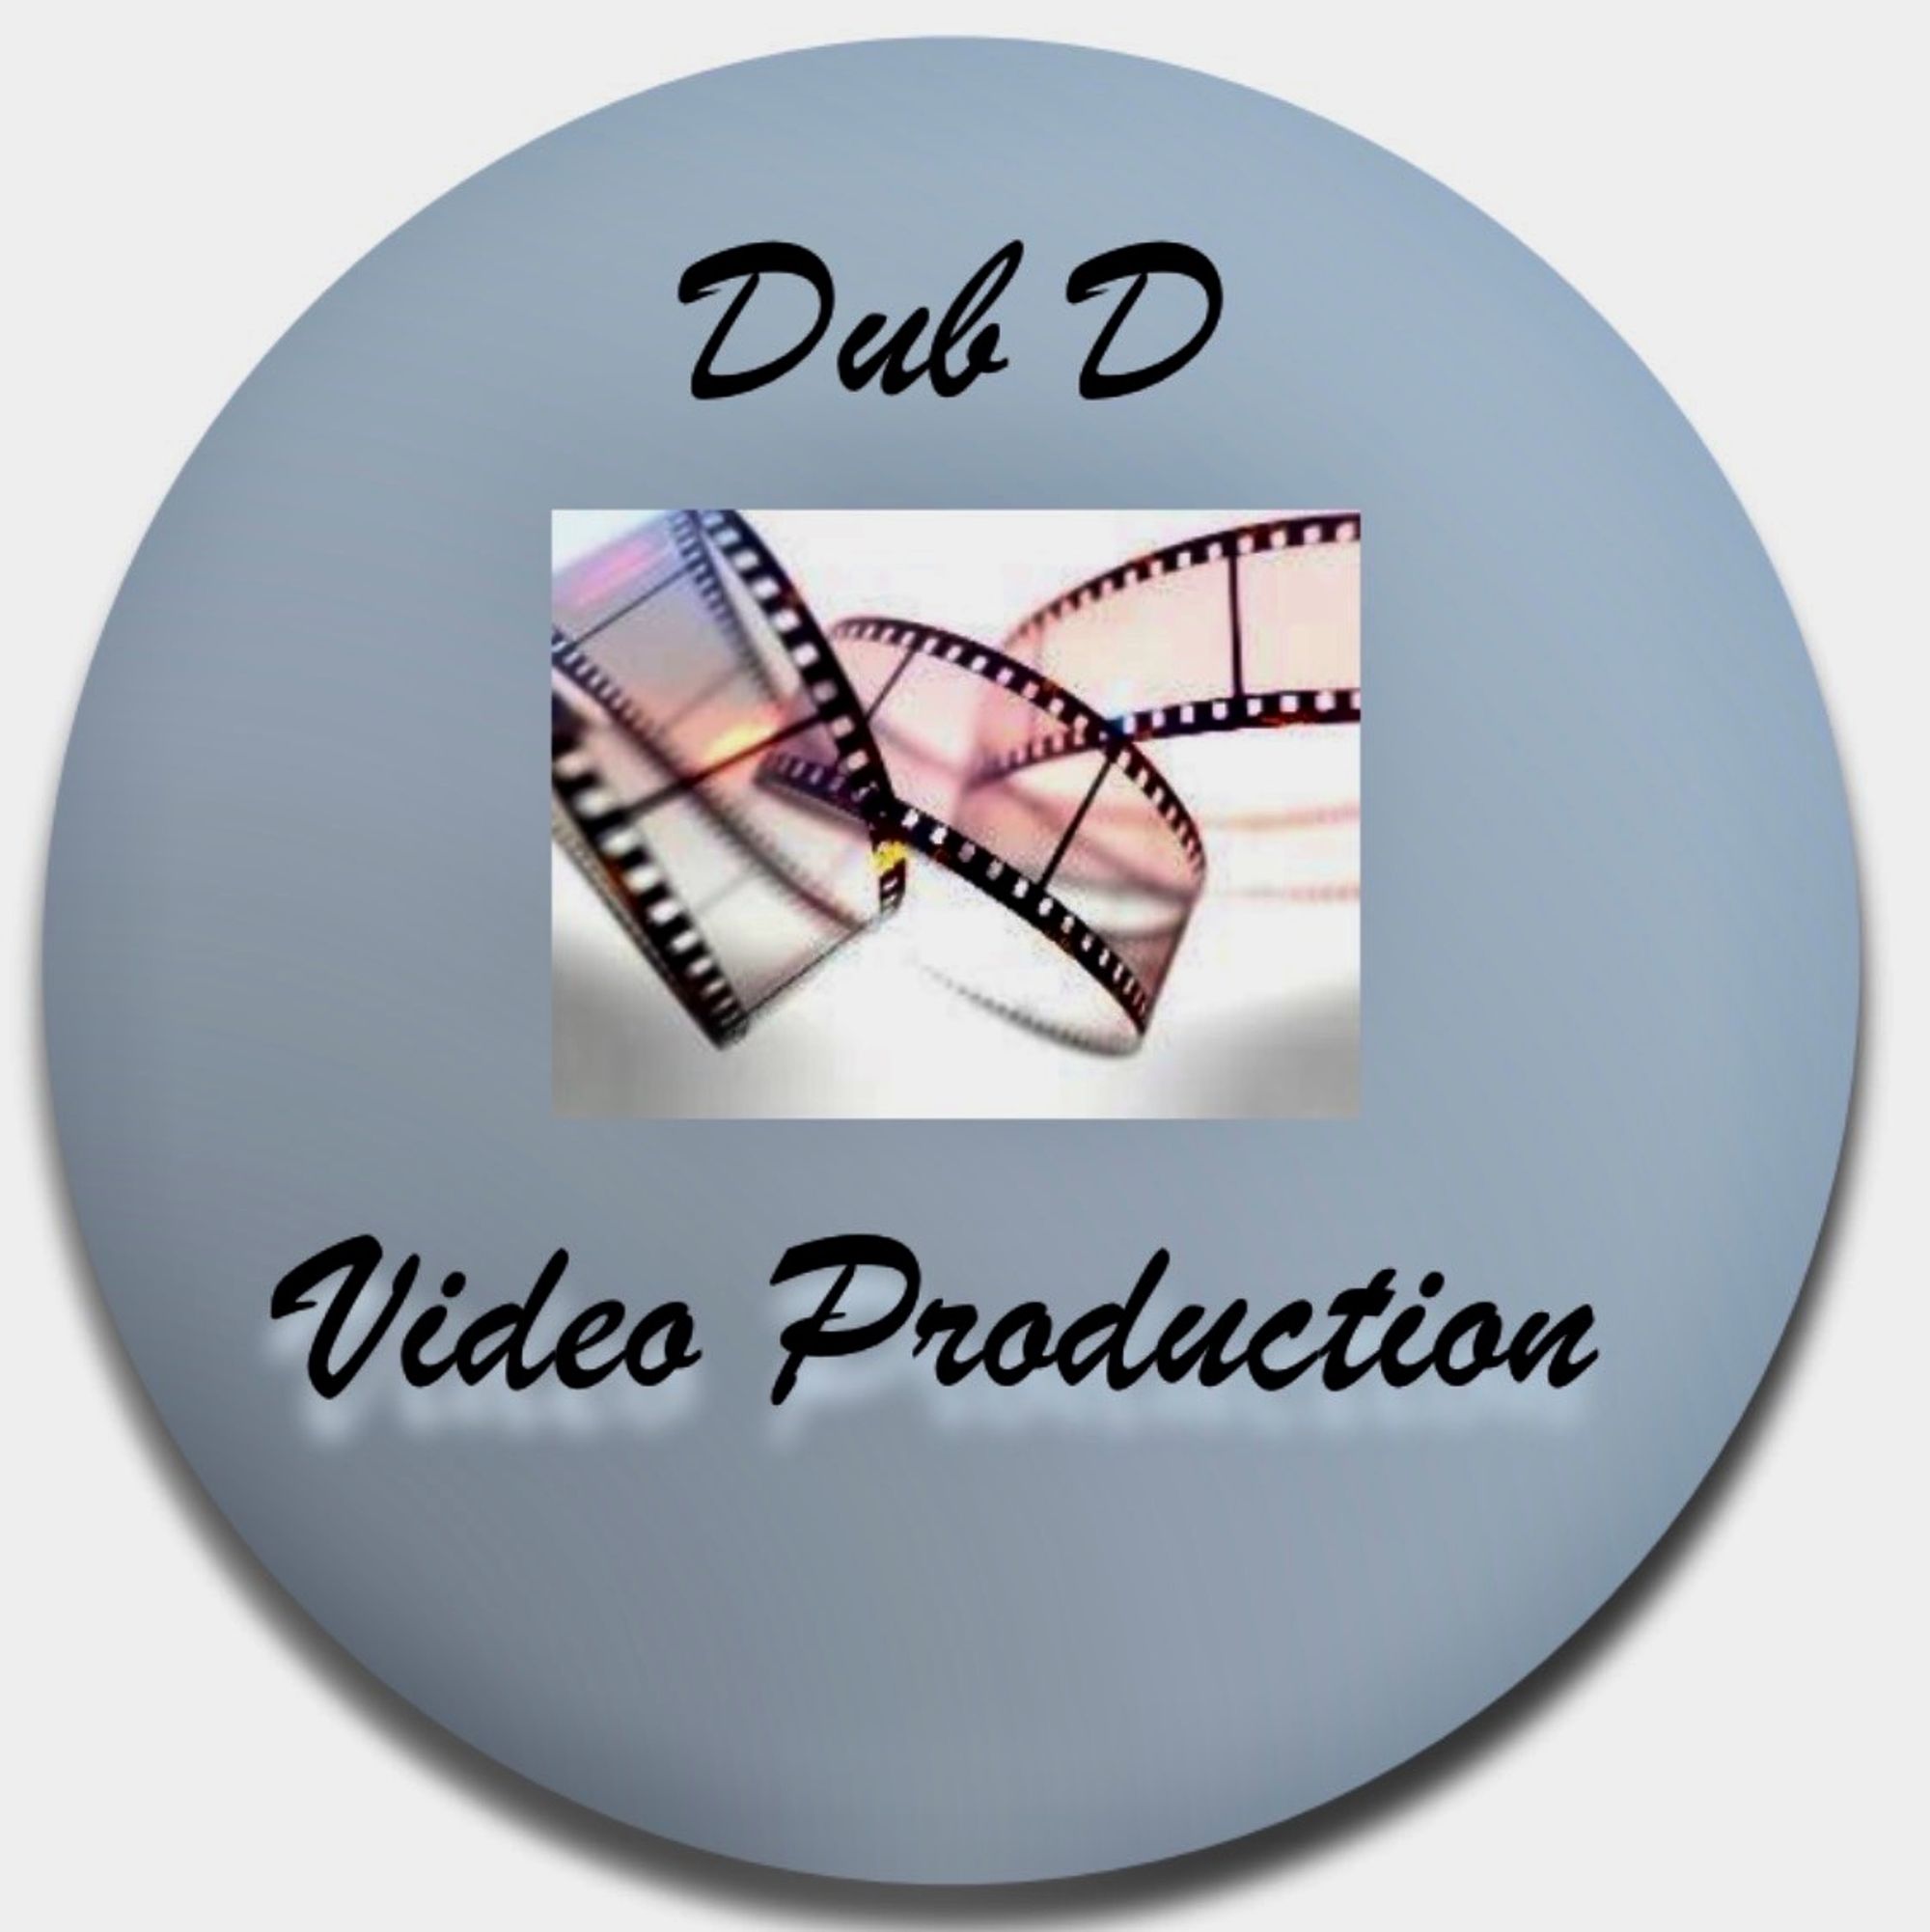 Dubd Video Productions 